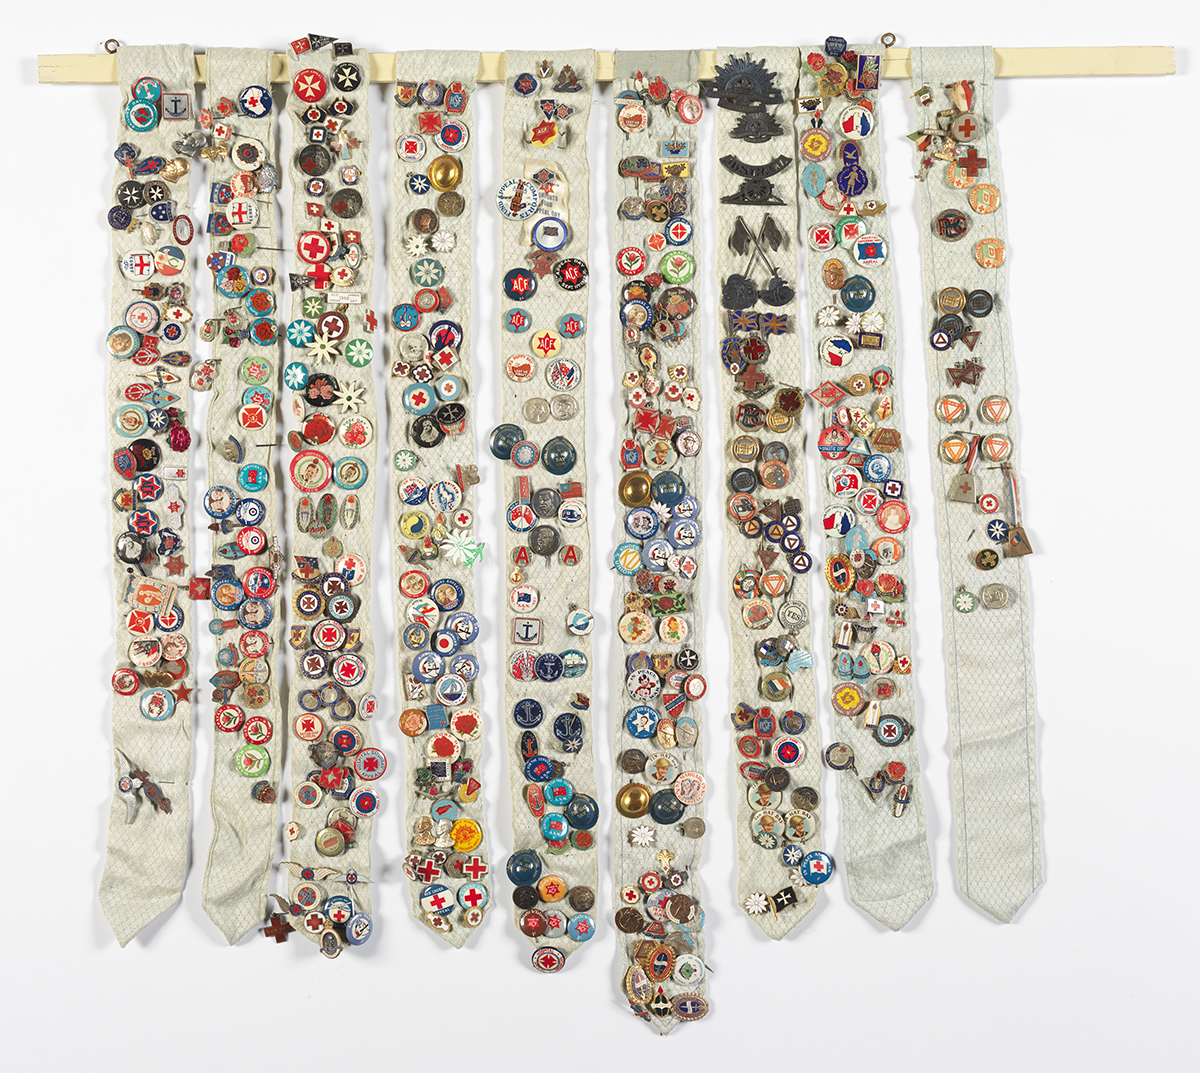 Photograph of 9 long strips of fabric holding hundreds of colourful badges. 